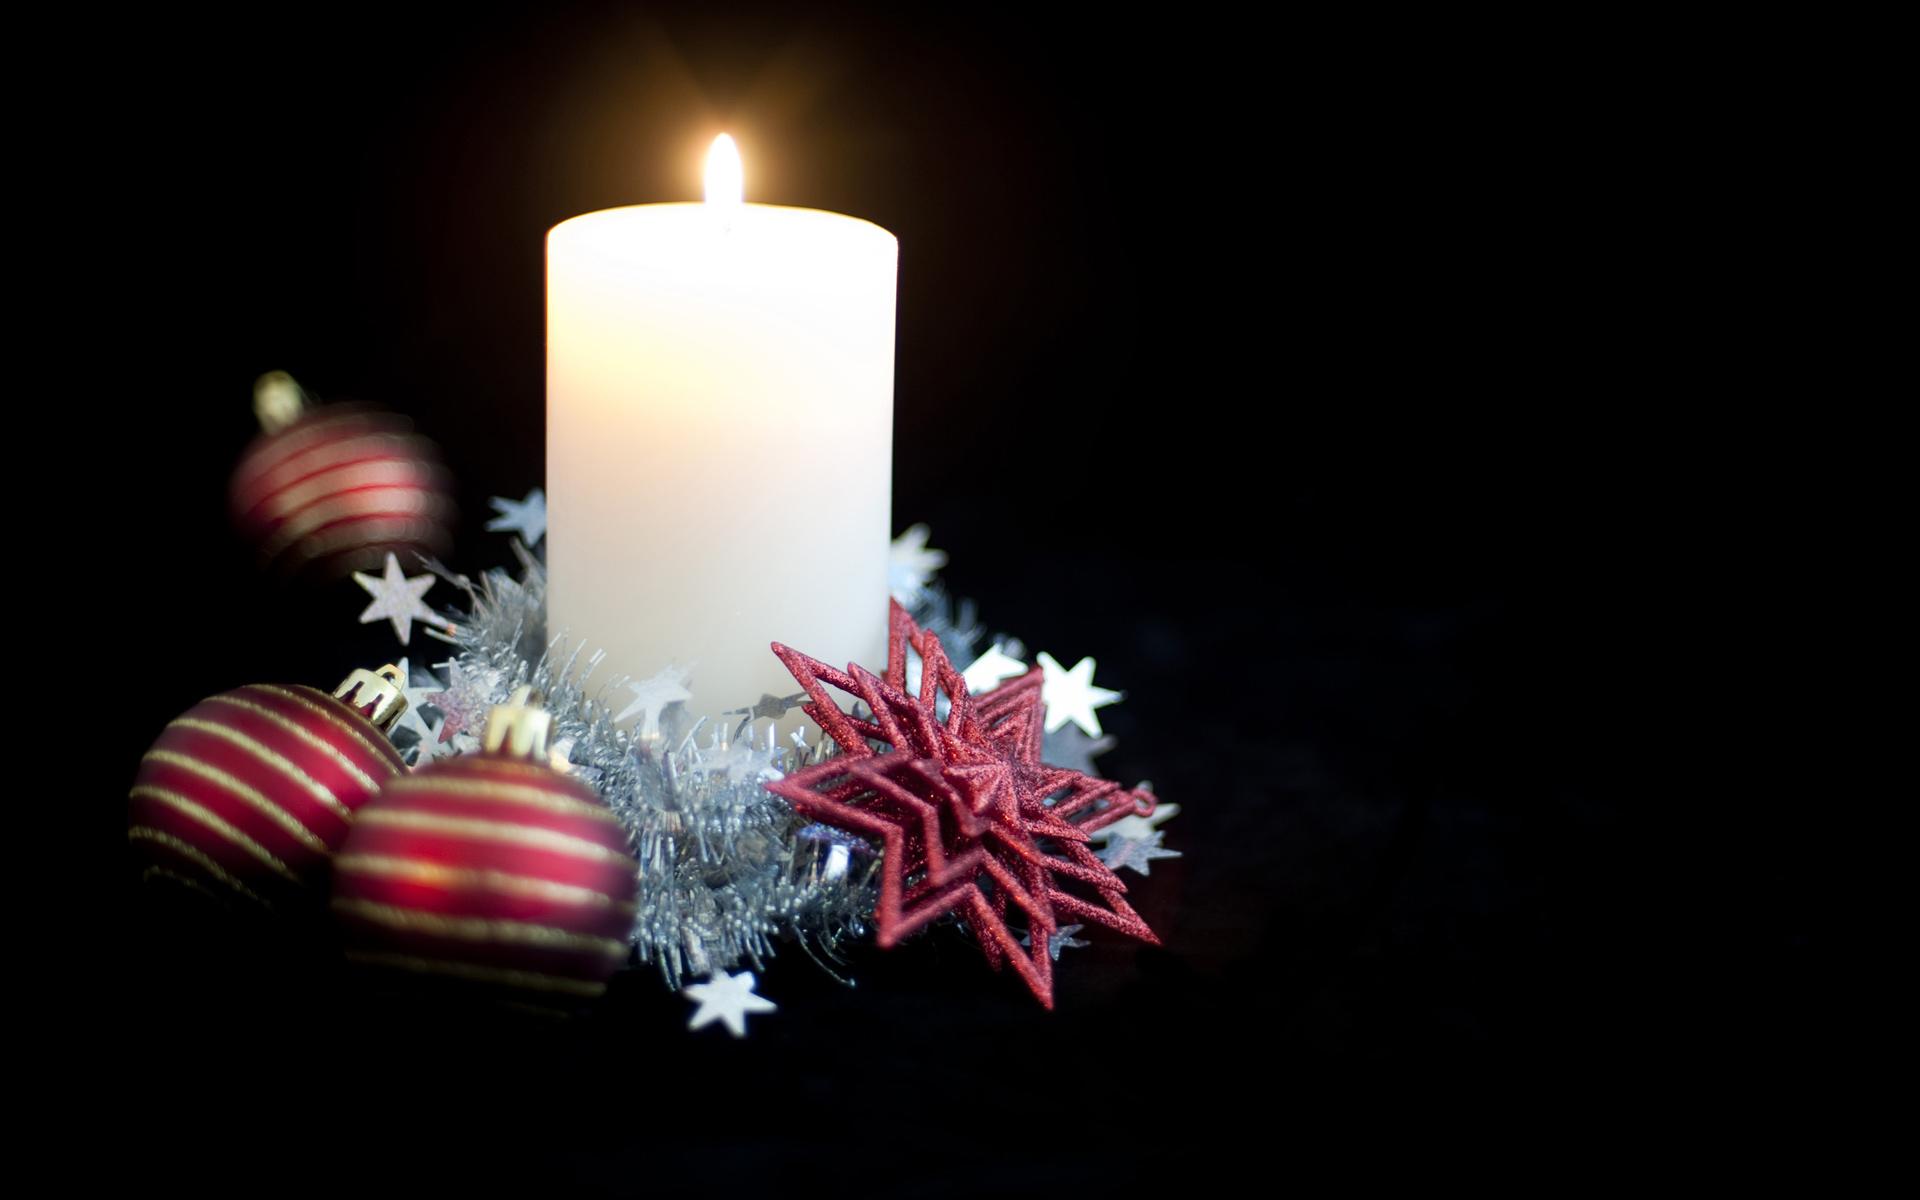 Download wallpaper candle christmas decorated beautiful computer